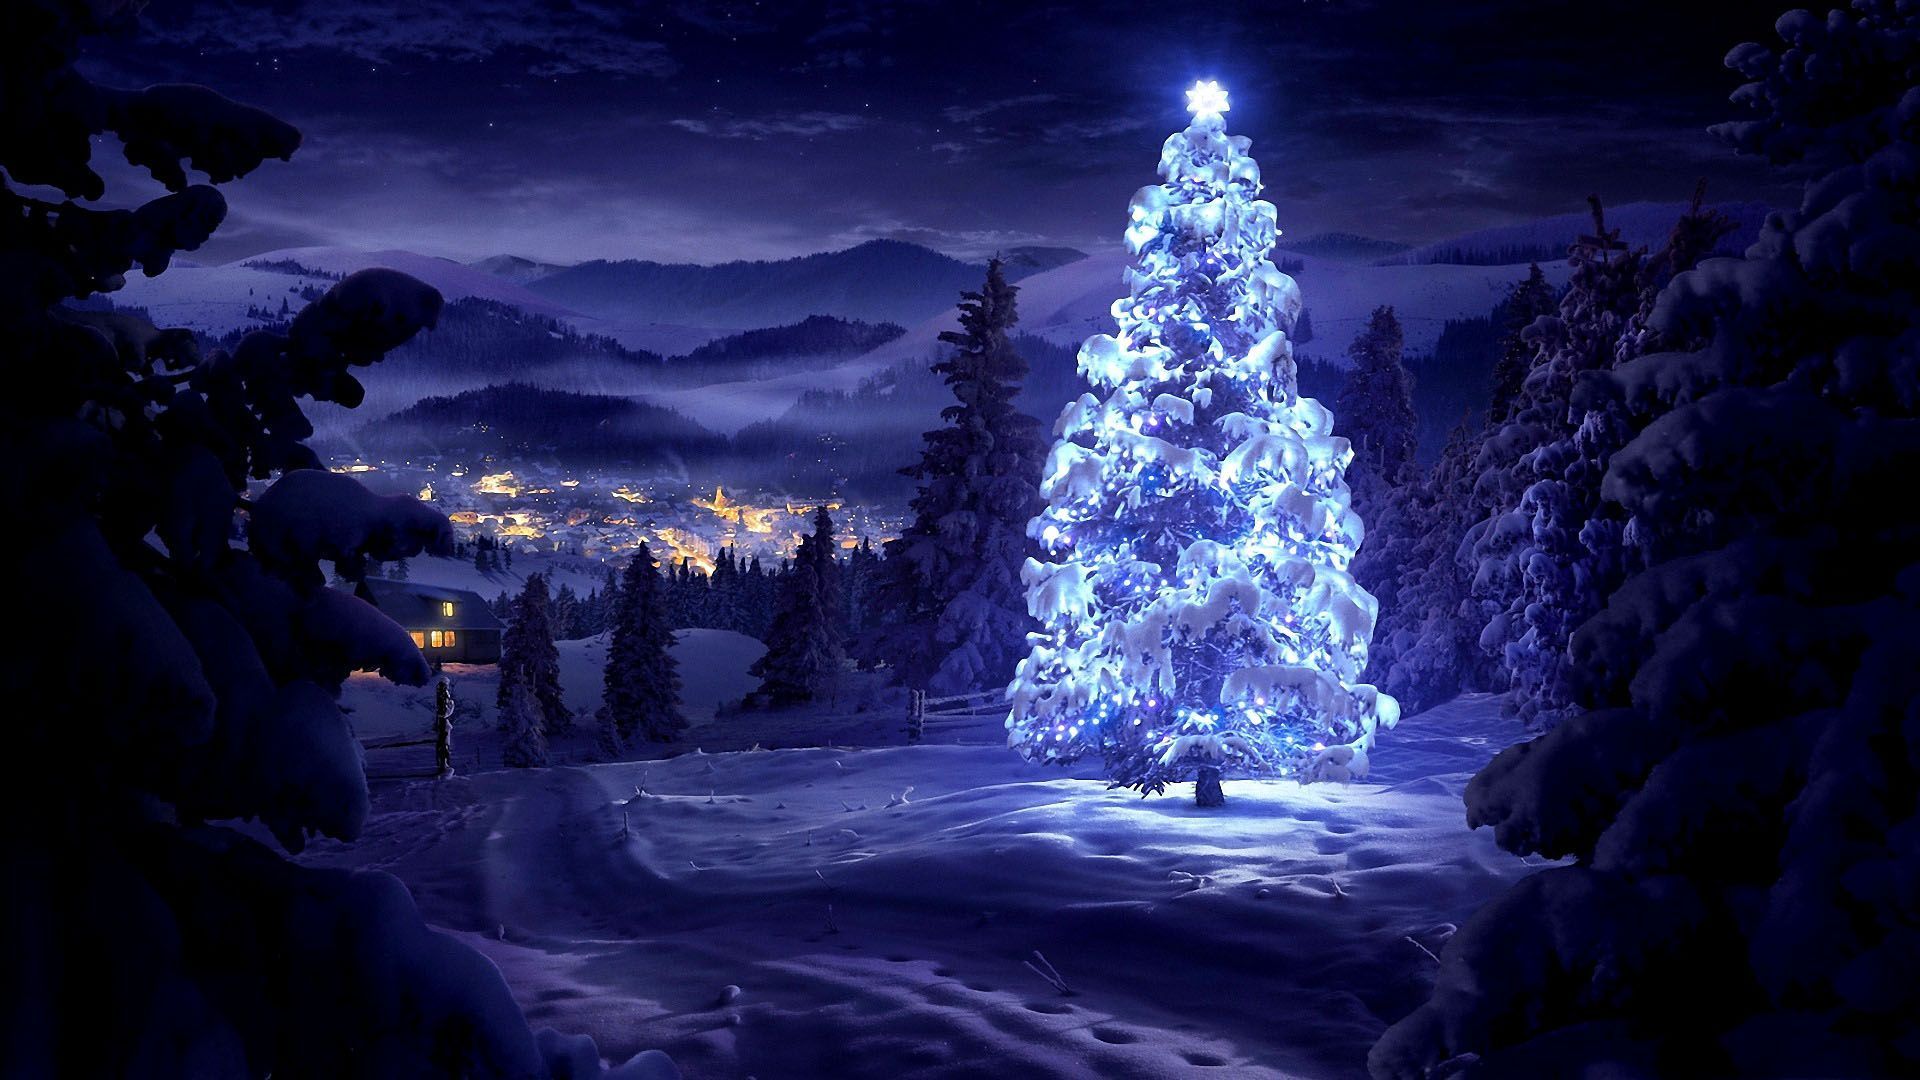 Christmas Tree Wallpaper HD Pictures One HD Wallpaper Pictures